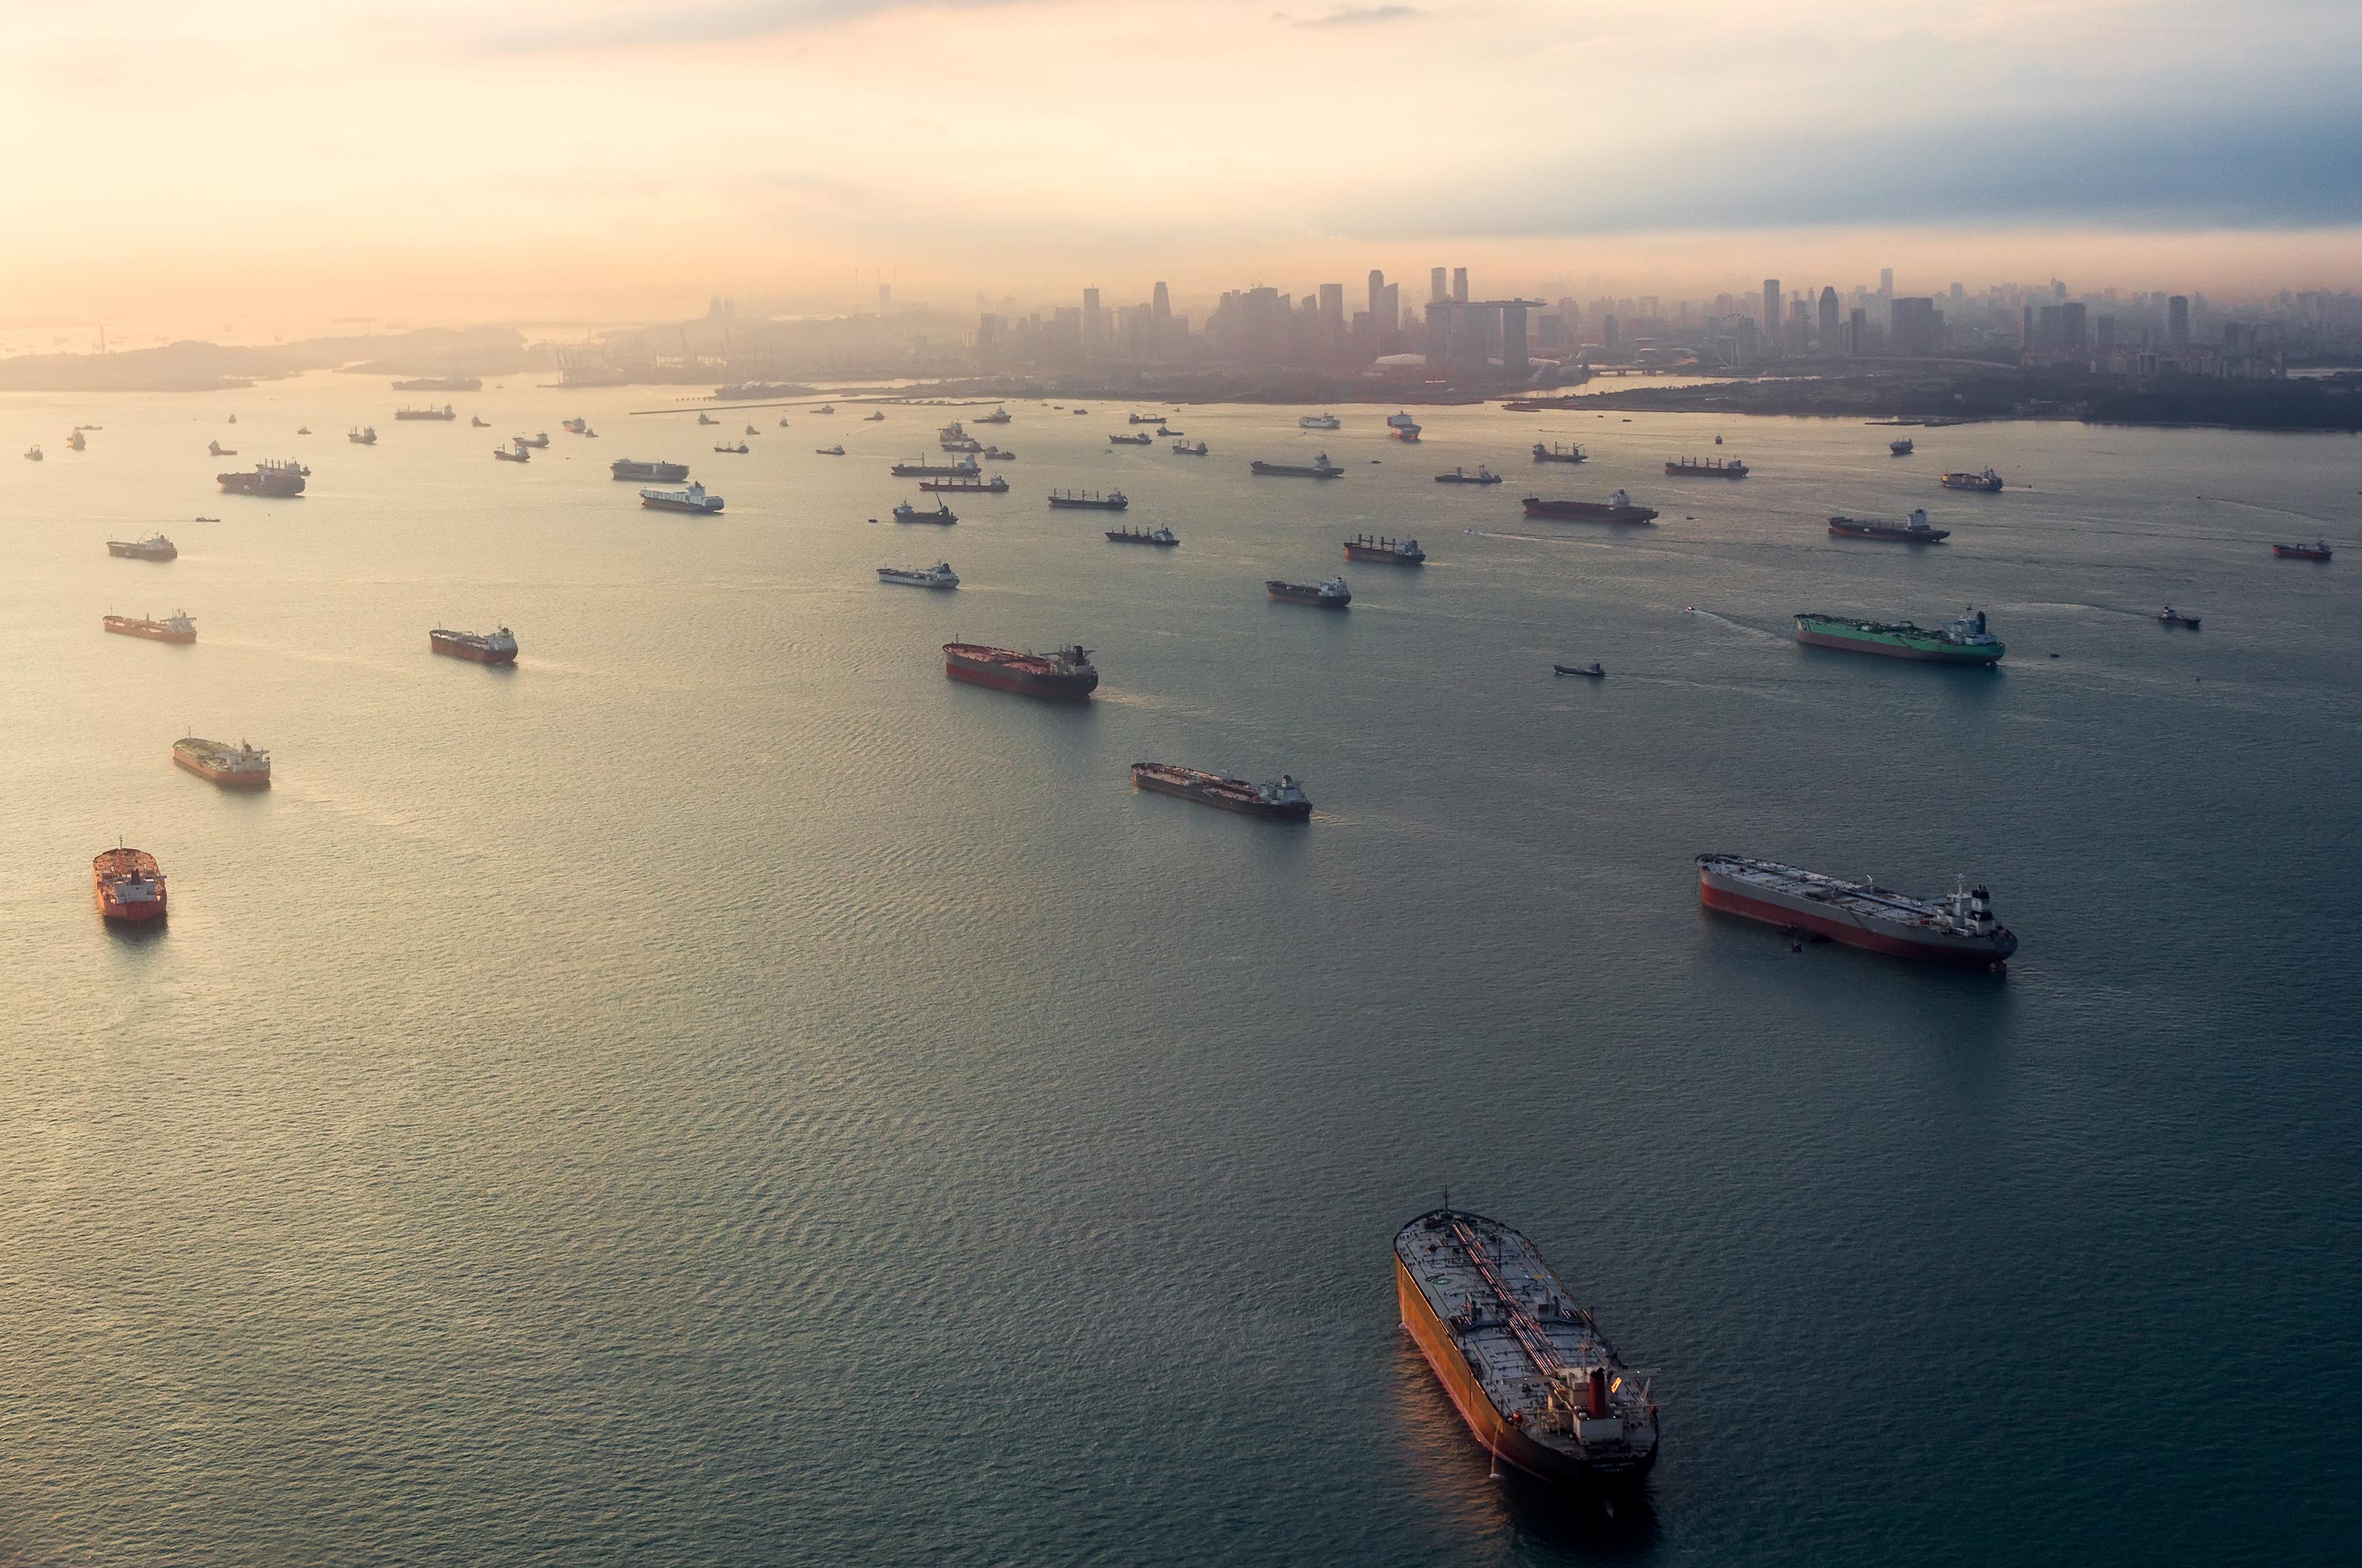 Empty cargo ships sit idle in the Singapore Strait as the sun sets over a hazy Singapore skyline. Photographer: Peter Novacco/Getty Images